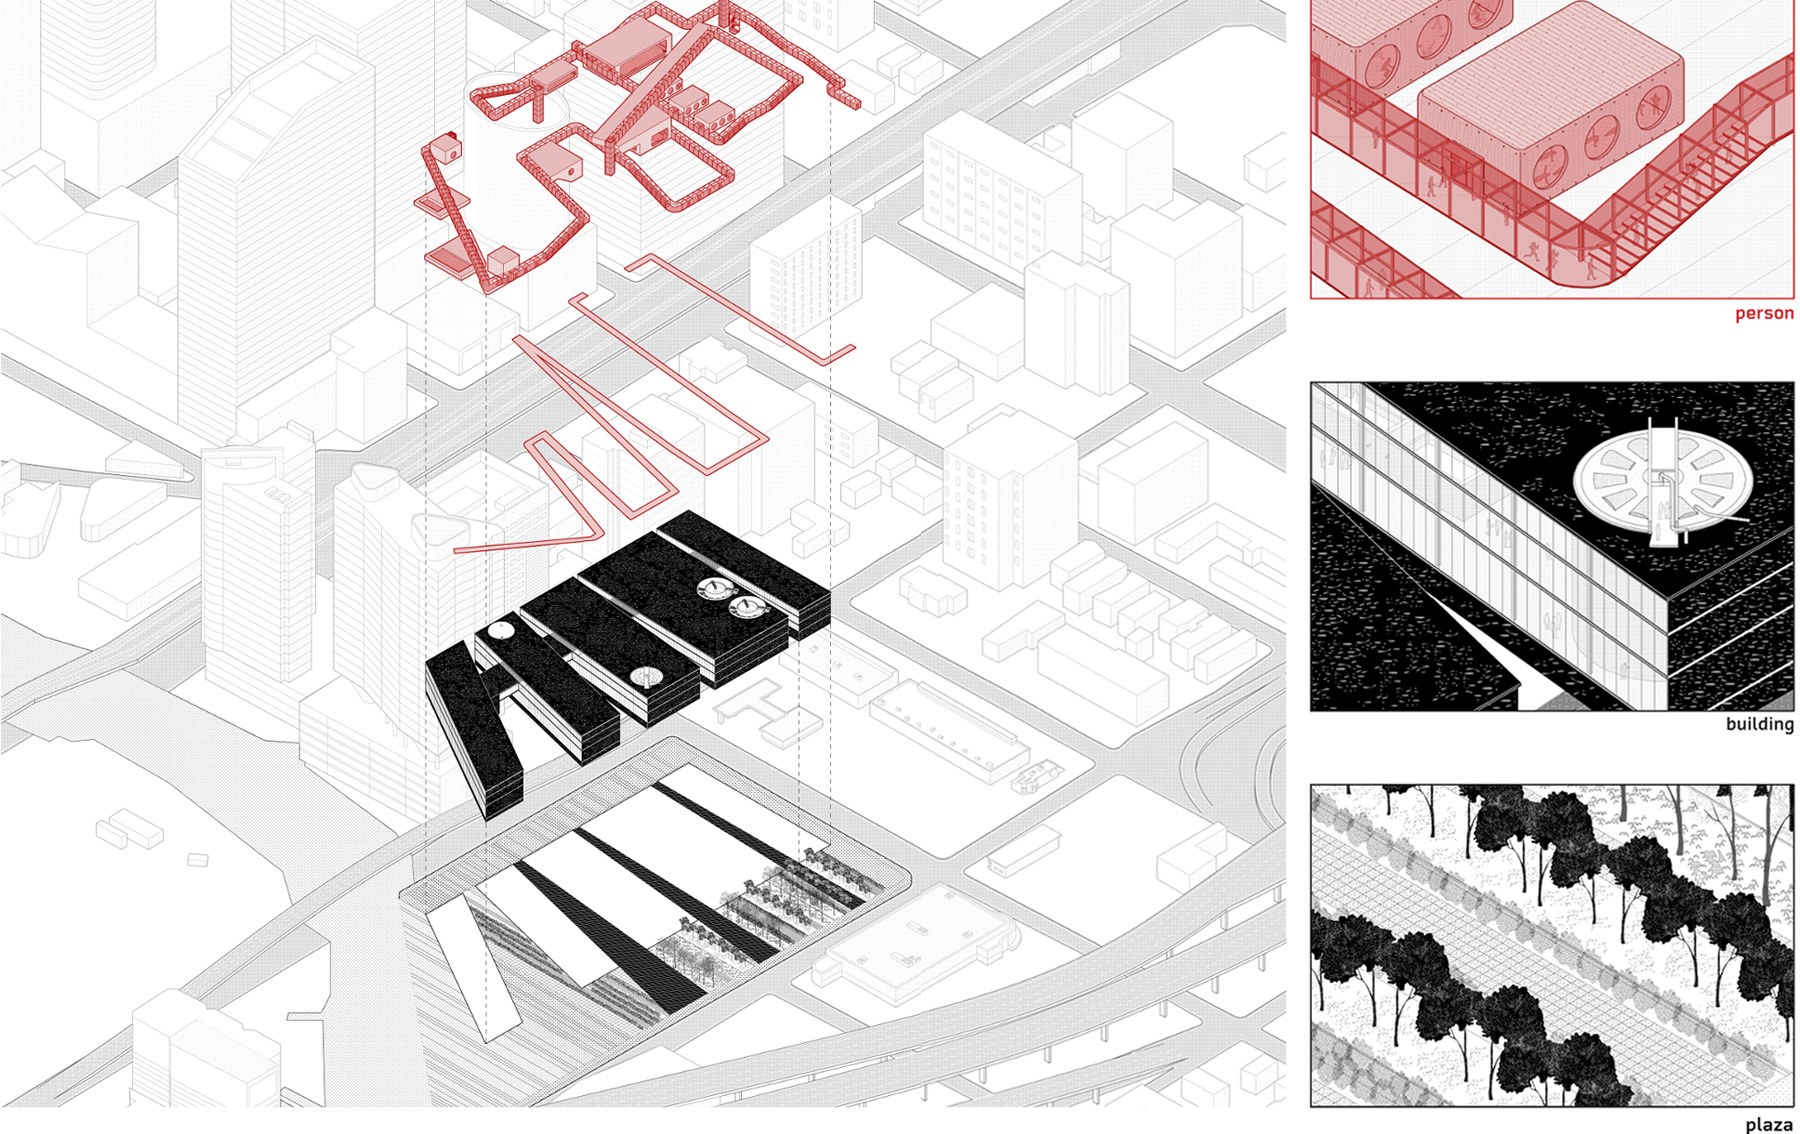 Leah Bohatch and Camille Kreisel's thesis: axonometric view of building with breakdown of building components: person, building, plaza